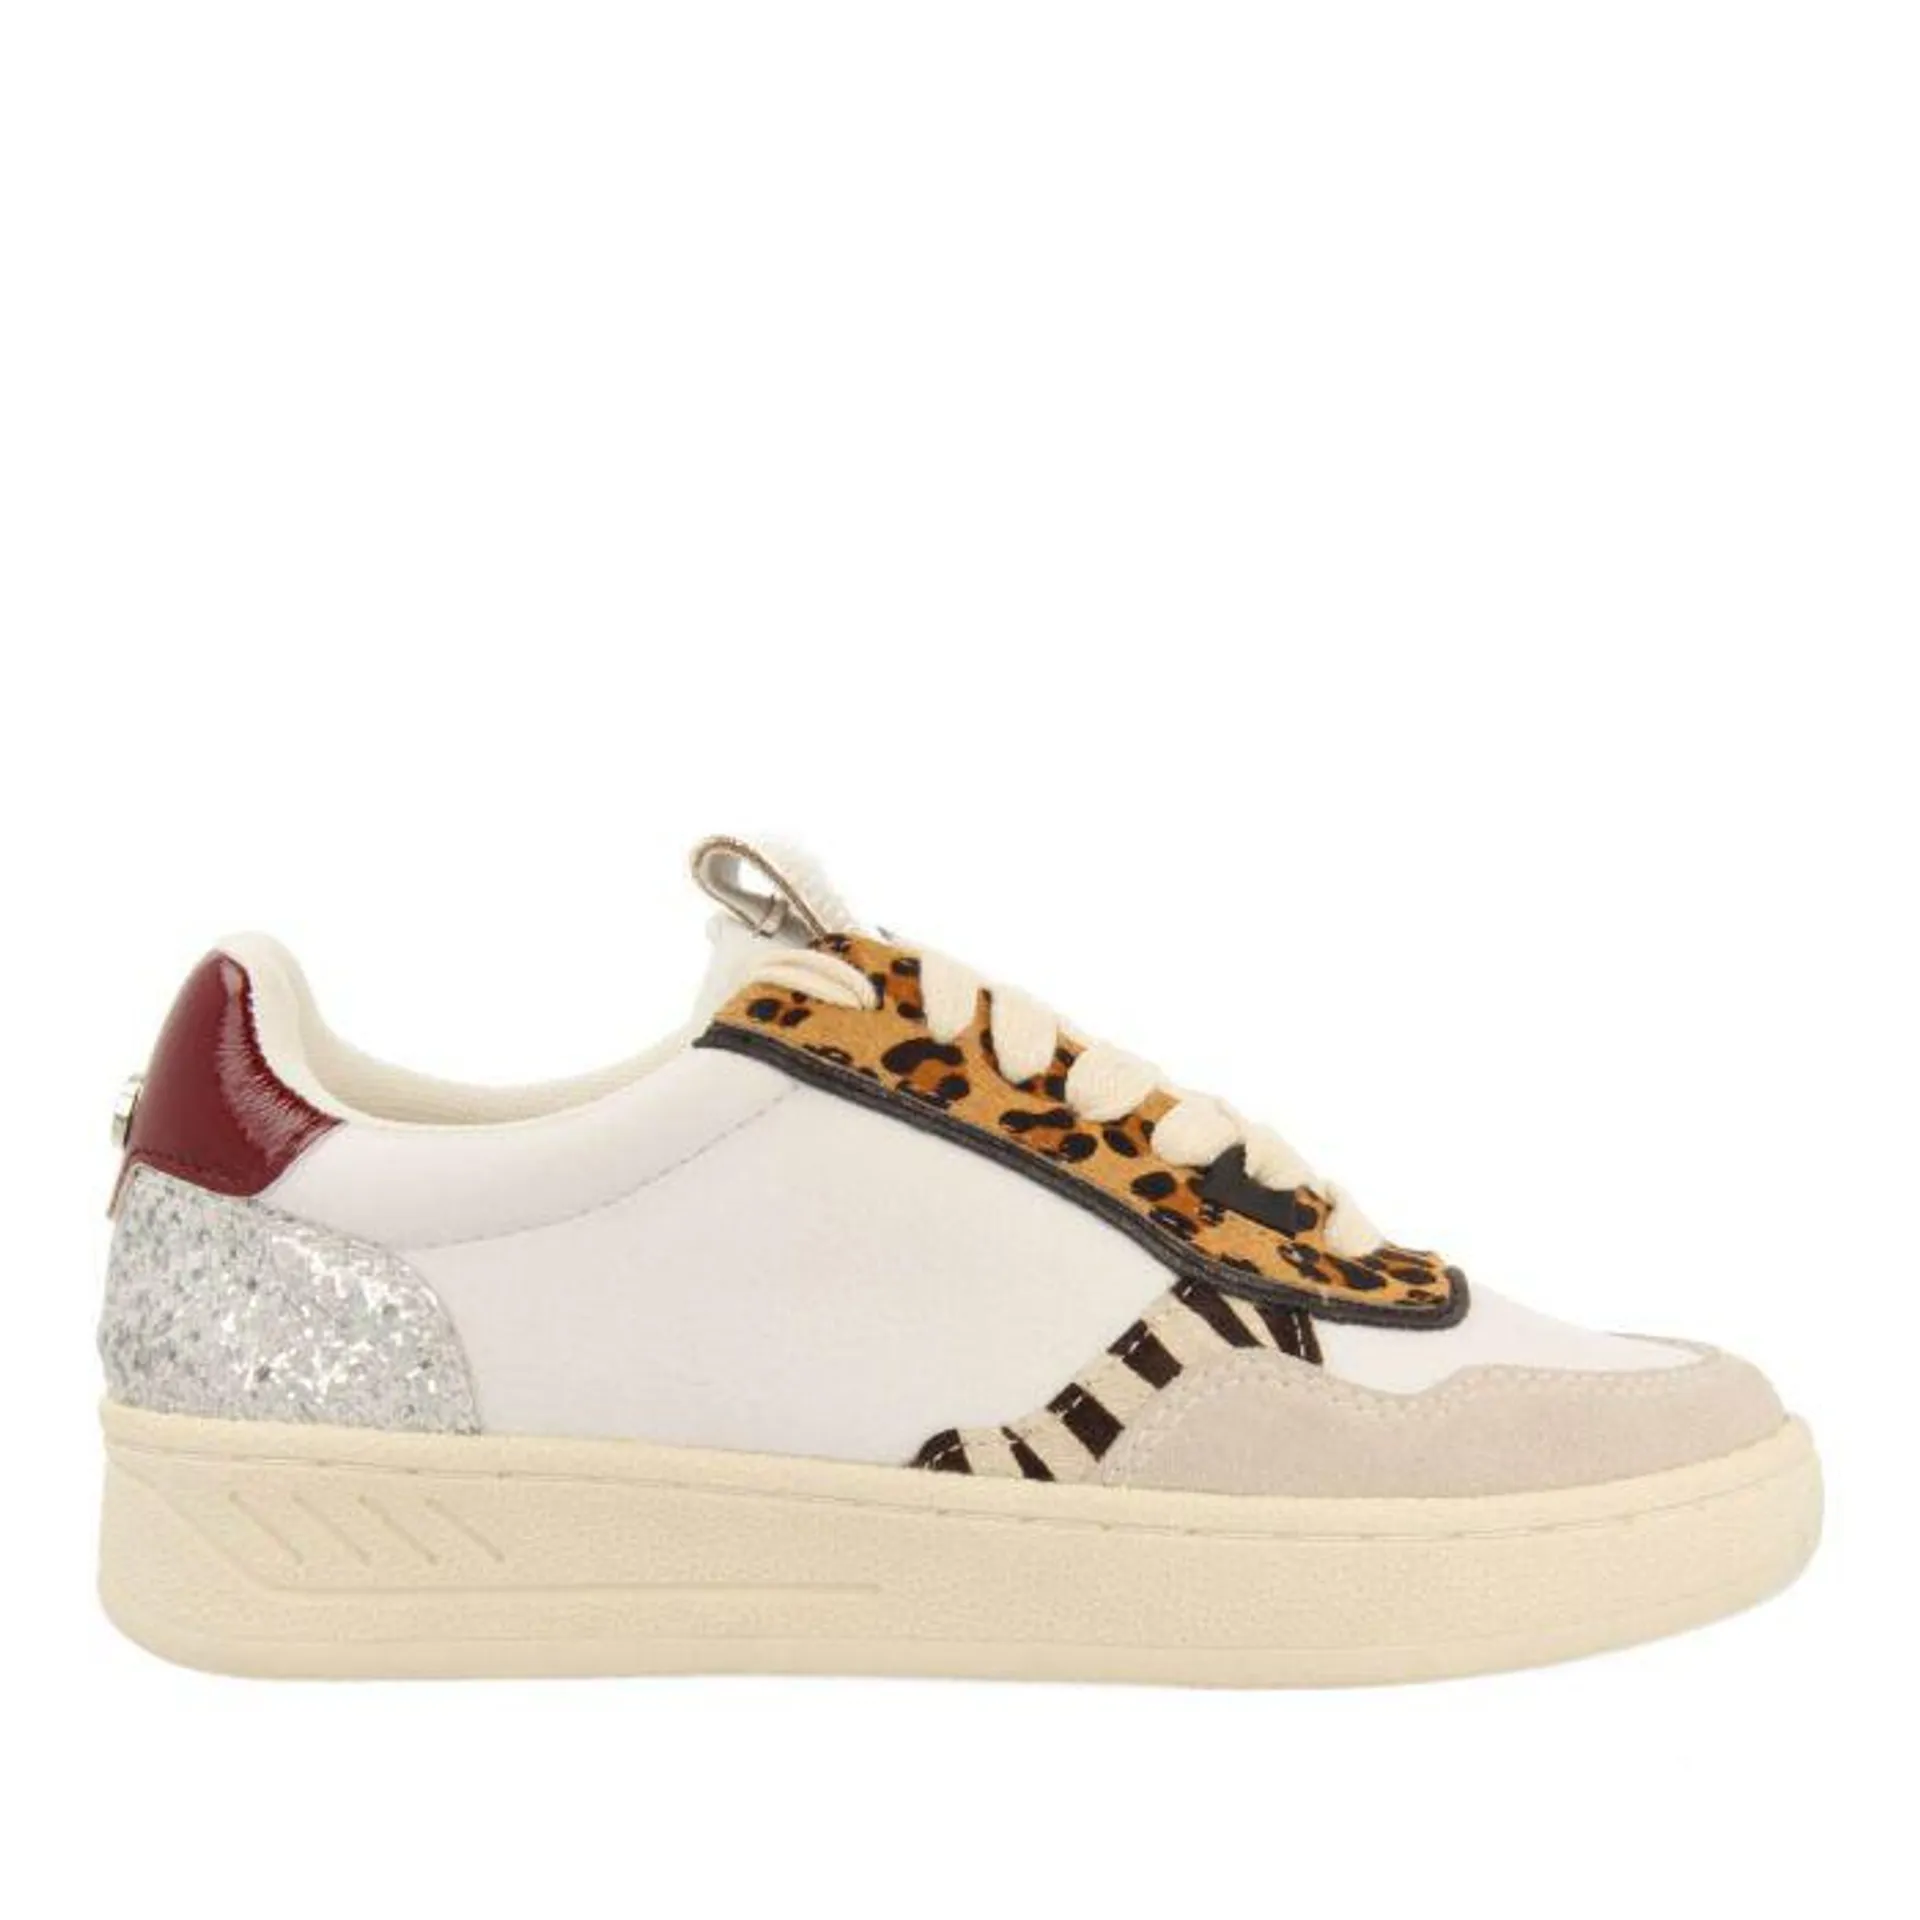 Bowdle women's white sneakers with mixed prints